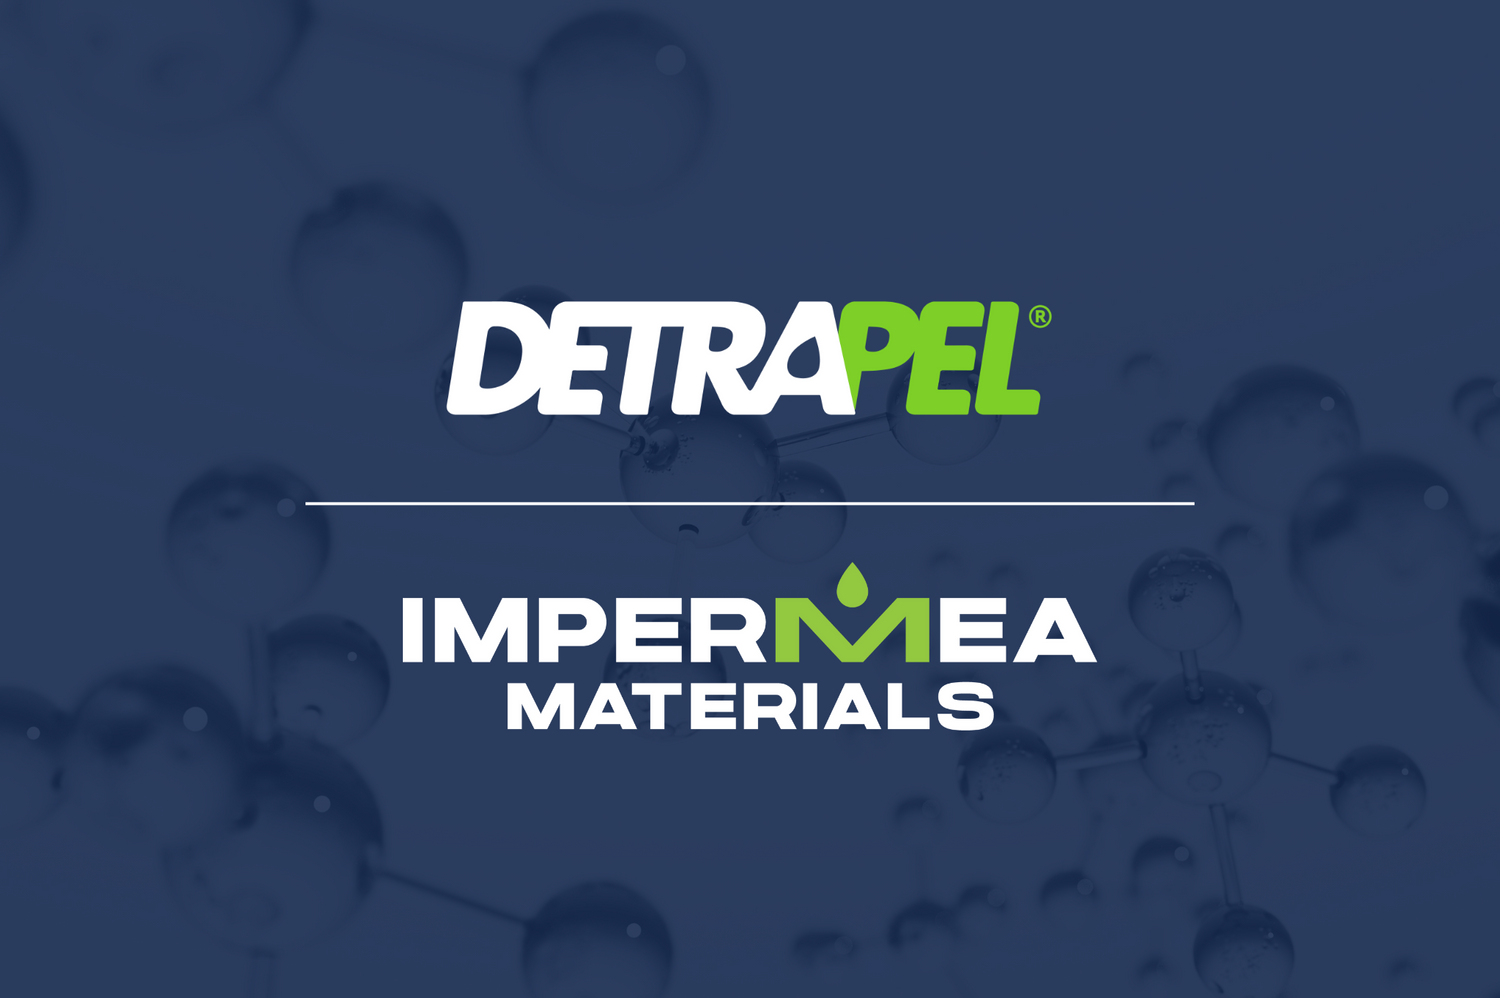 DetraPel and Impermea Materials Logos on Blue Background